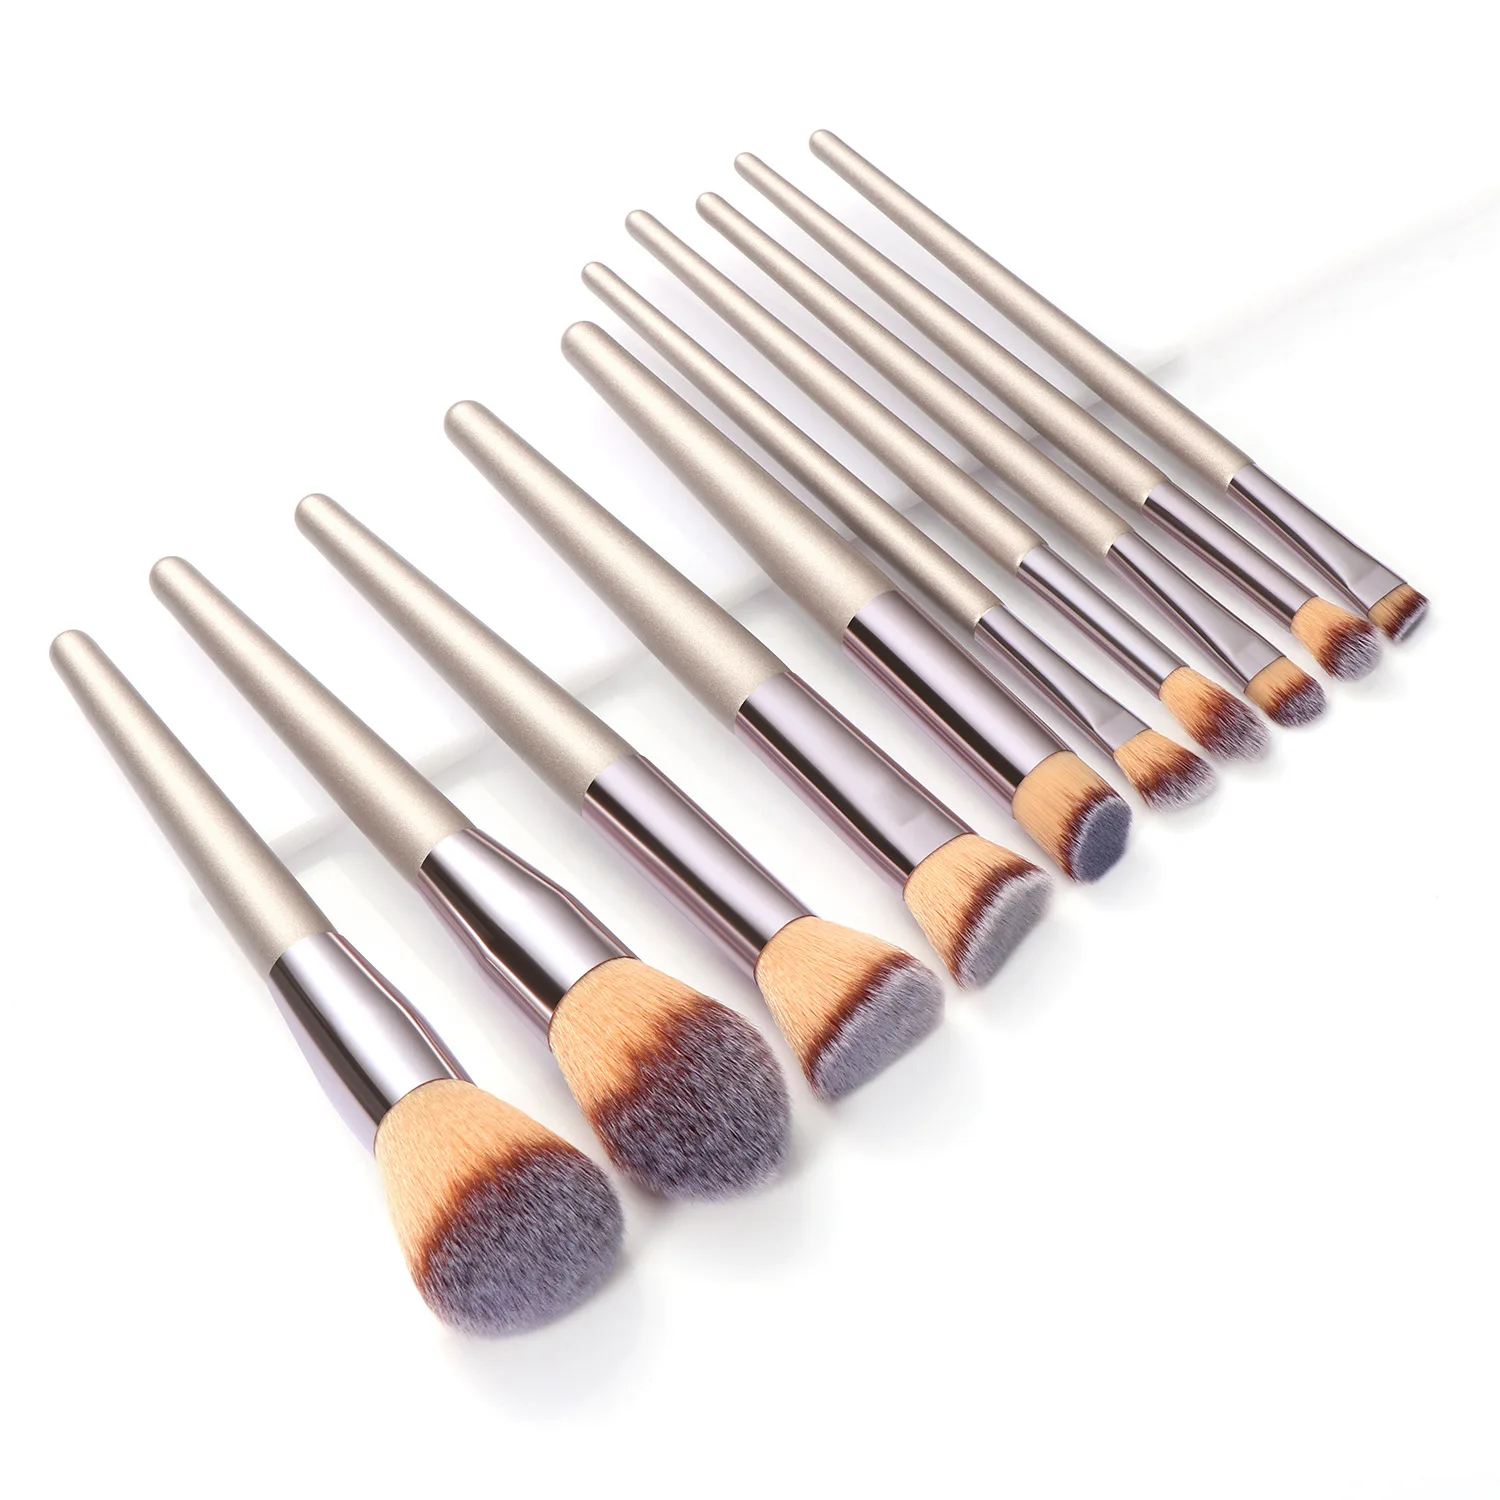 10/14Pcs Champagne Makeup Brushes Set For Cosmetic Foundation Powder Blush Eyeshadow Highlighter Face Beauty Make Up Tool